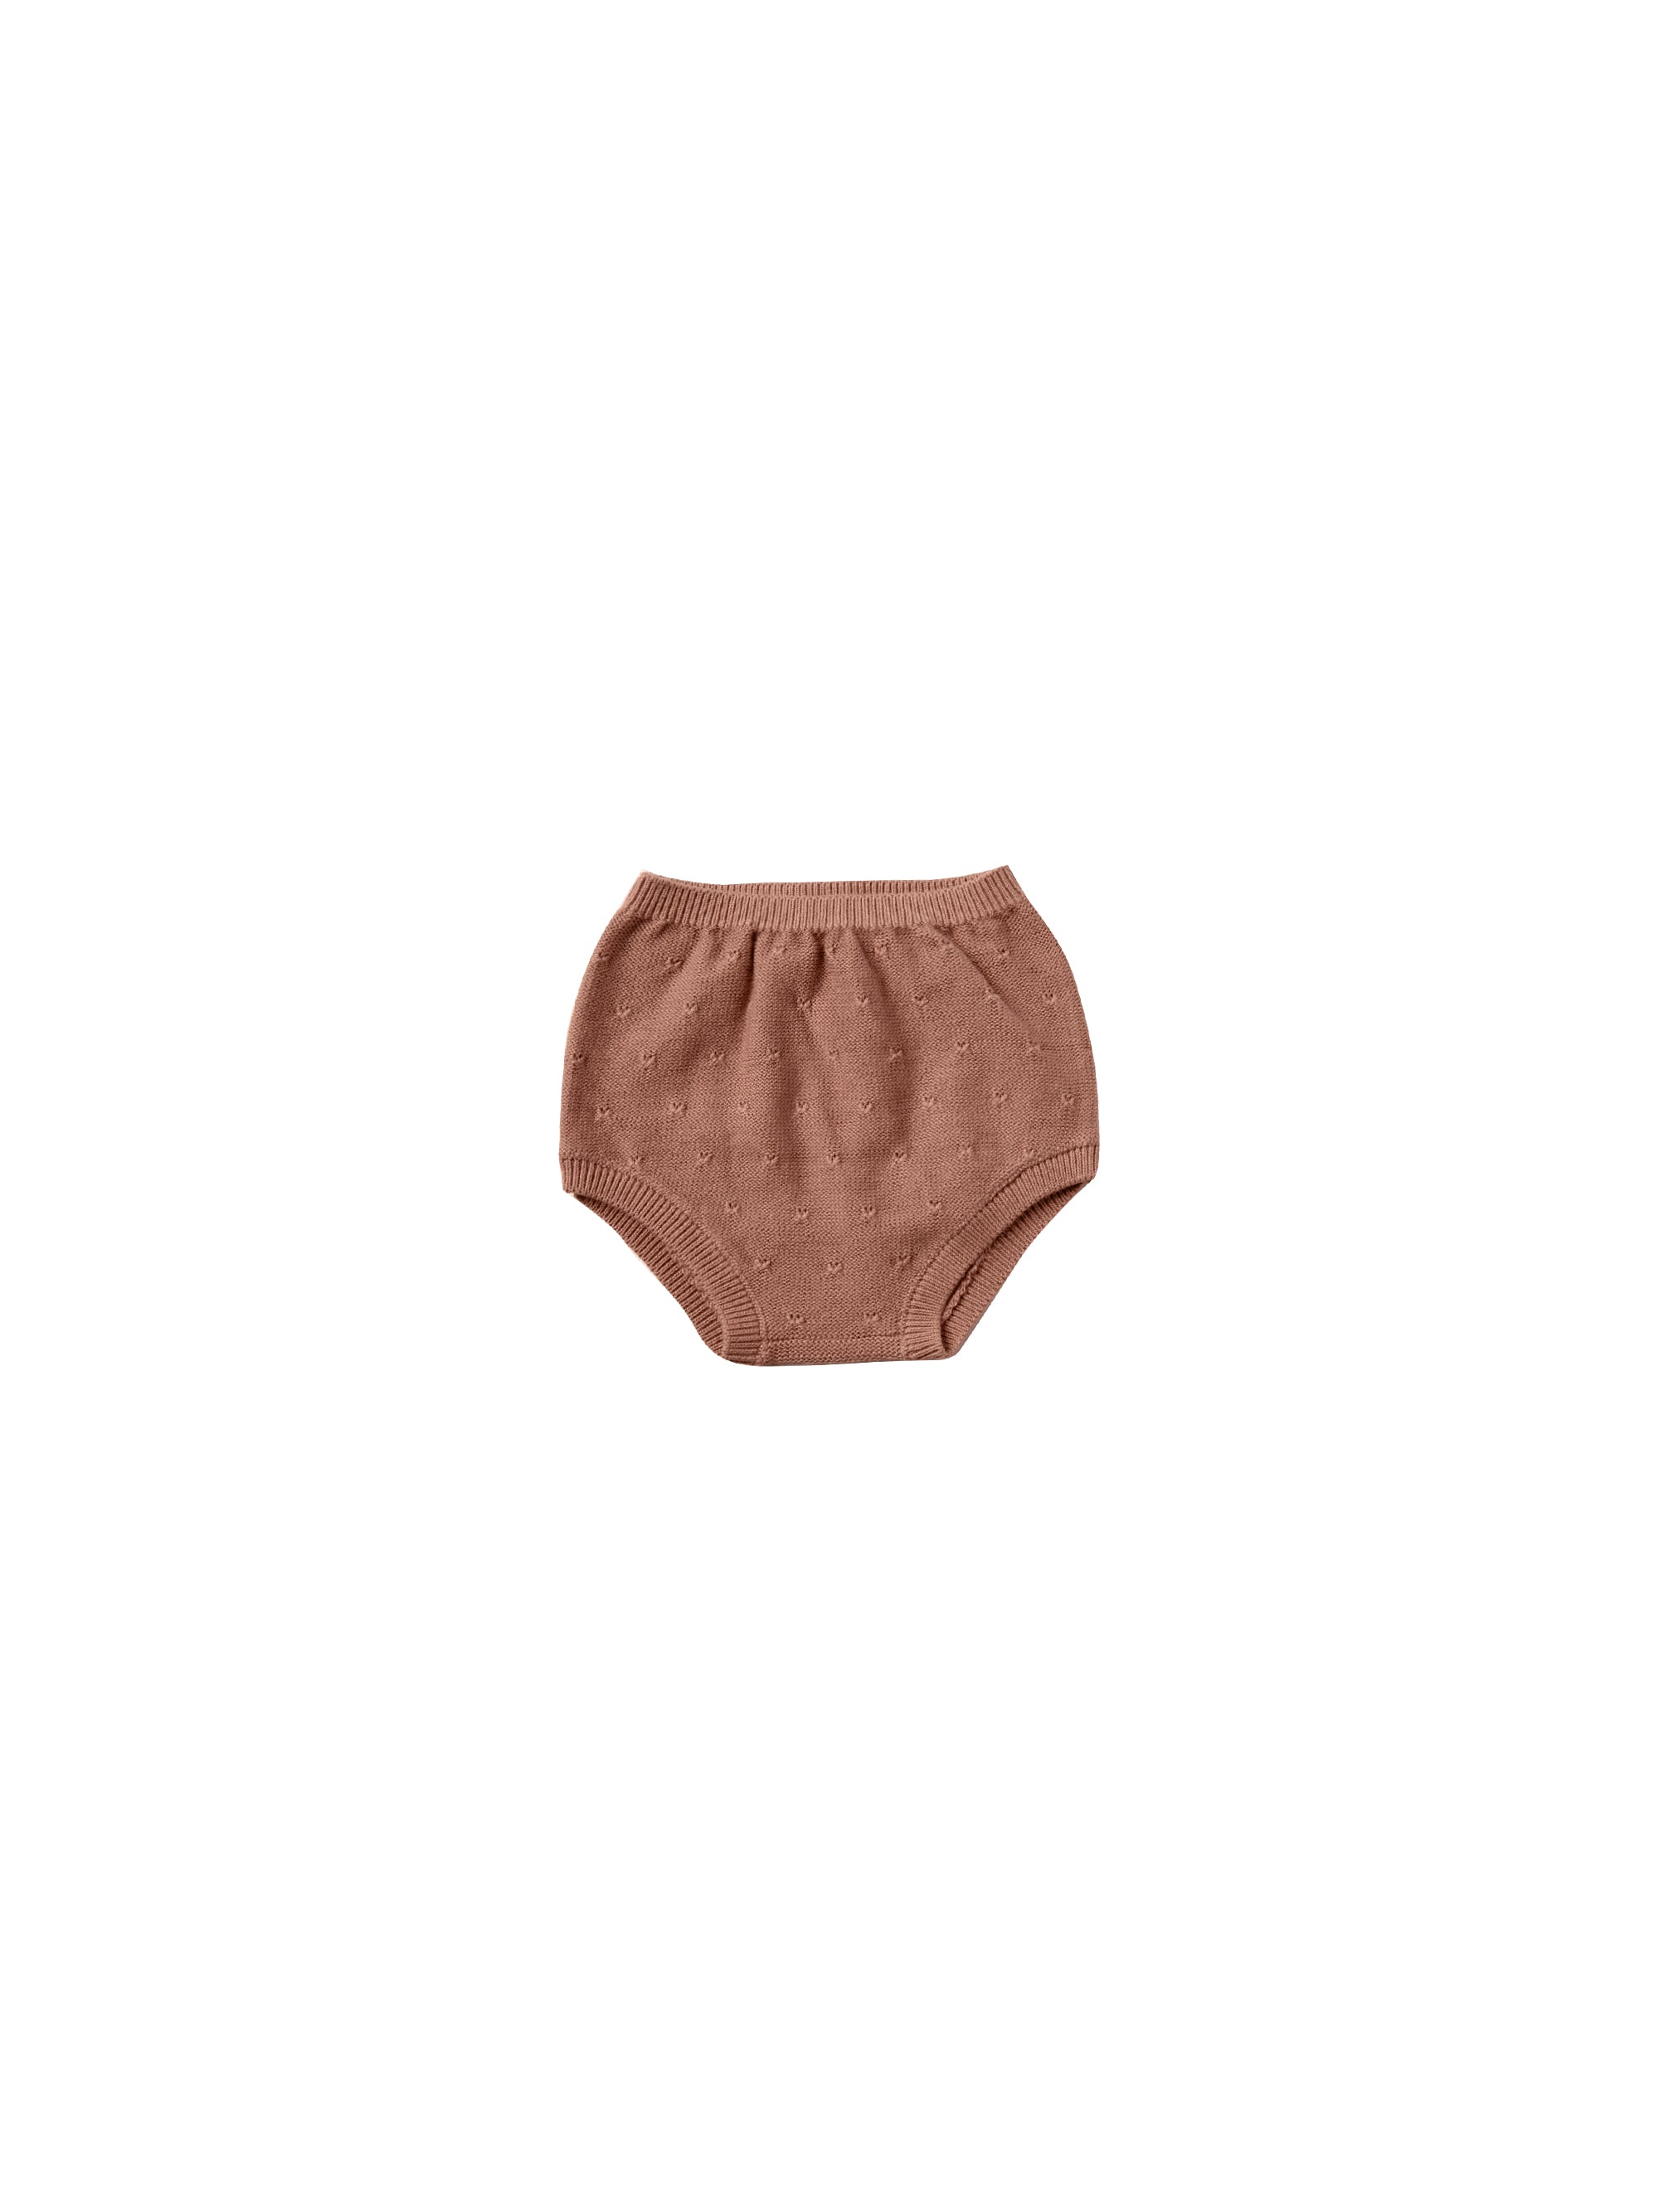 Quincy Mae Knit Bloomer - Clay